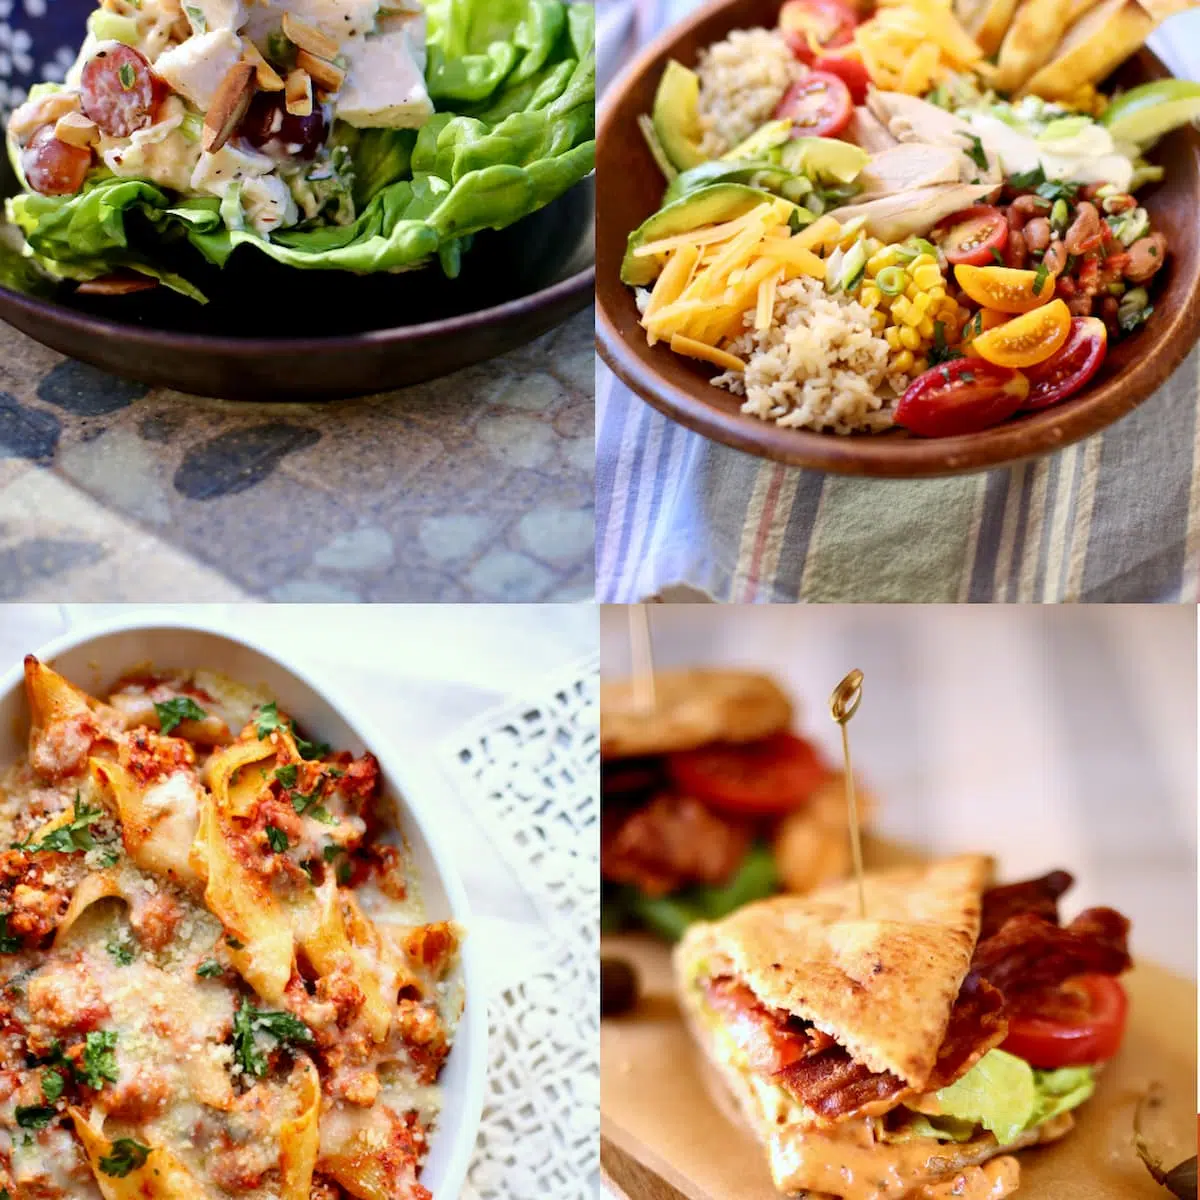 Four food photos in a collage.